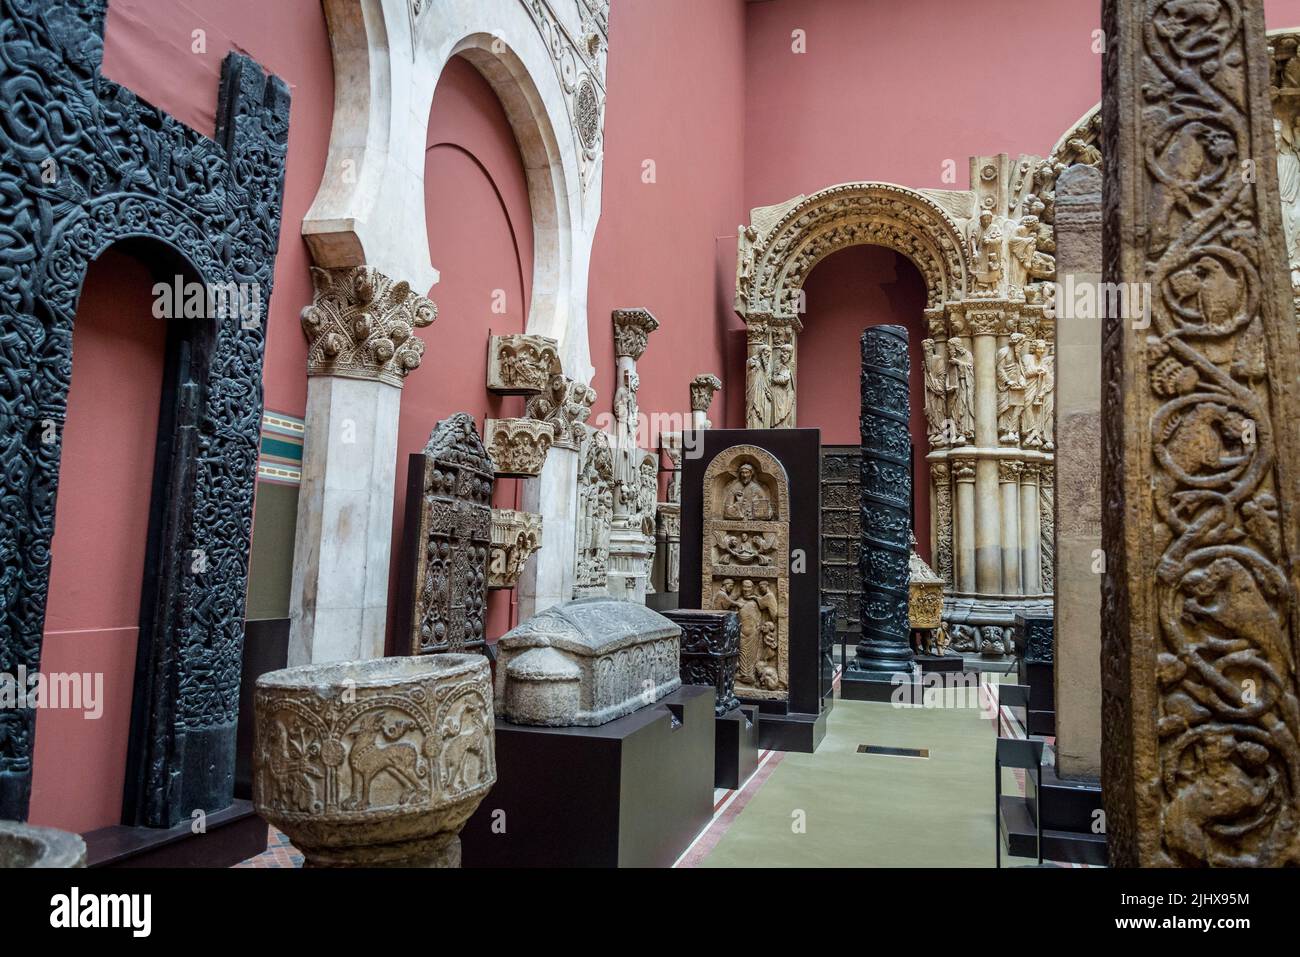 Cast Collection, opened in 1873, the Cast Courts display copies of some of the world's most significant works of art reproduced in plaster, V&A, Londo Stock Photo